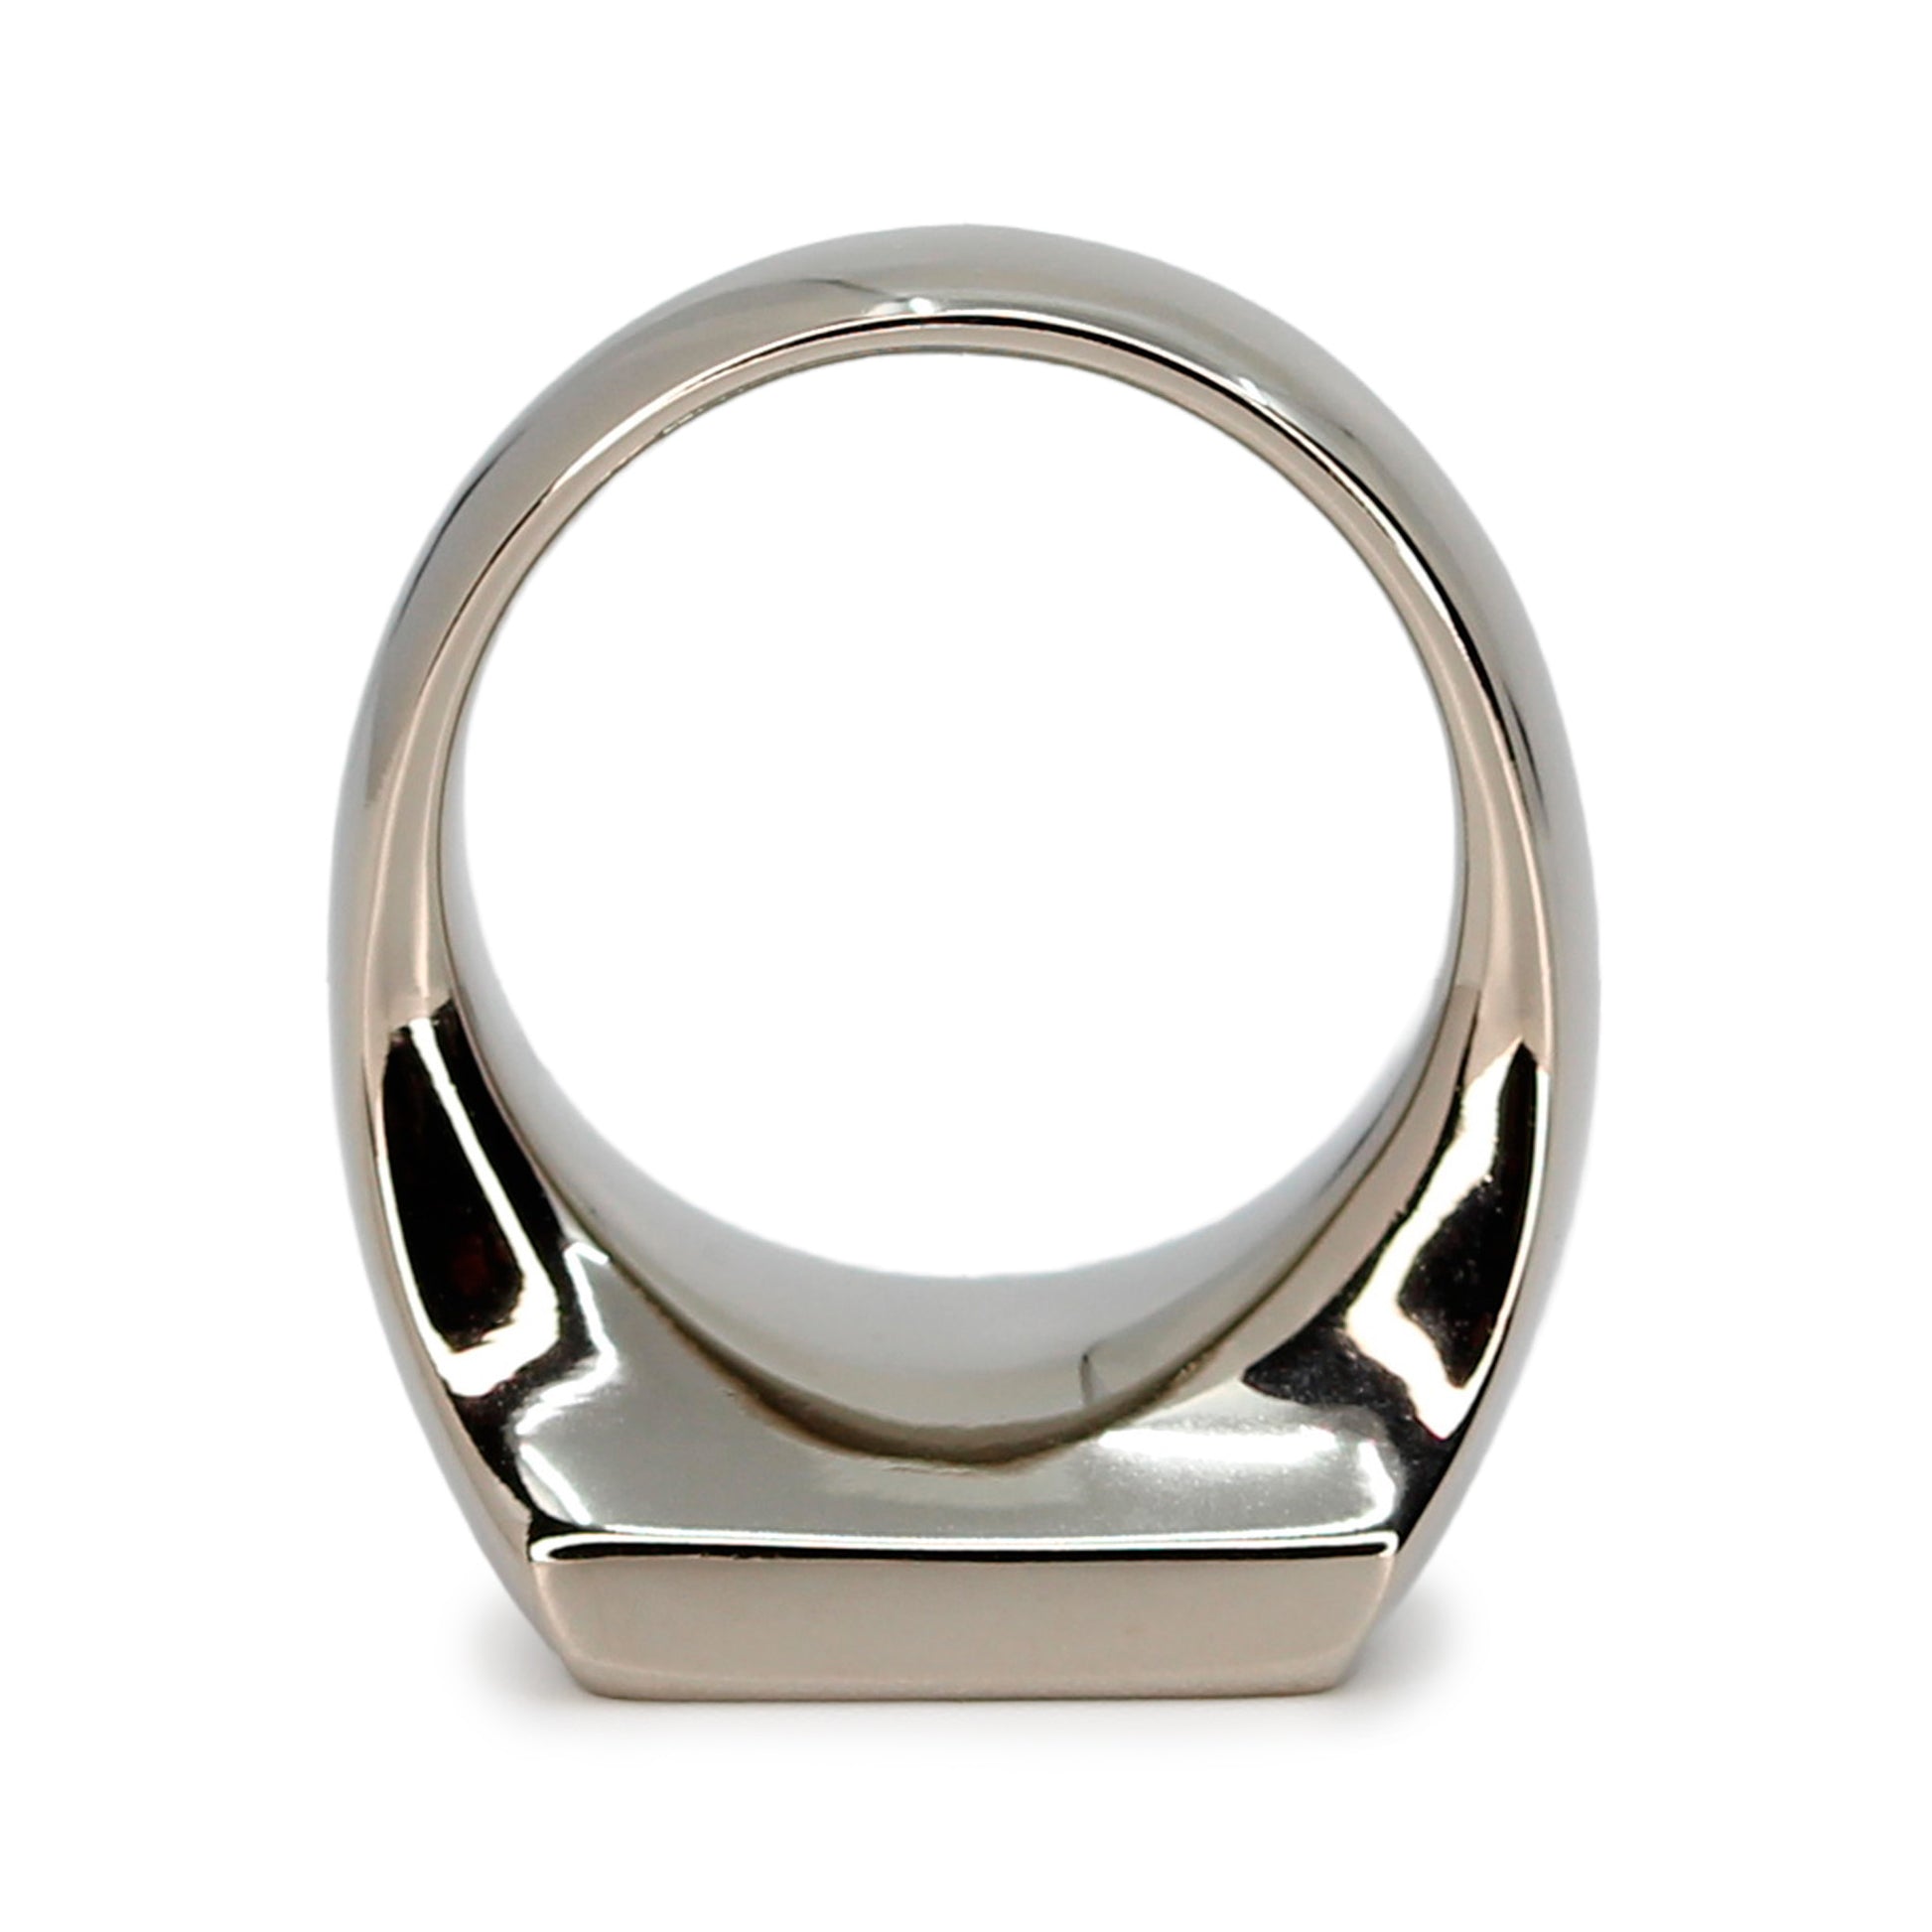 Single silver-colored titanium signet ring, 15x15 mm wide surface with an engraved palm tree. Image shows front ring with front facing down